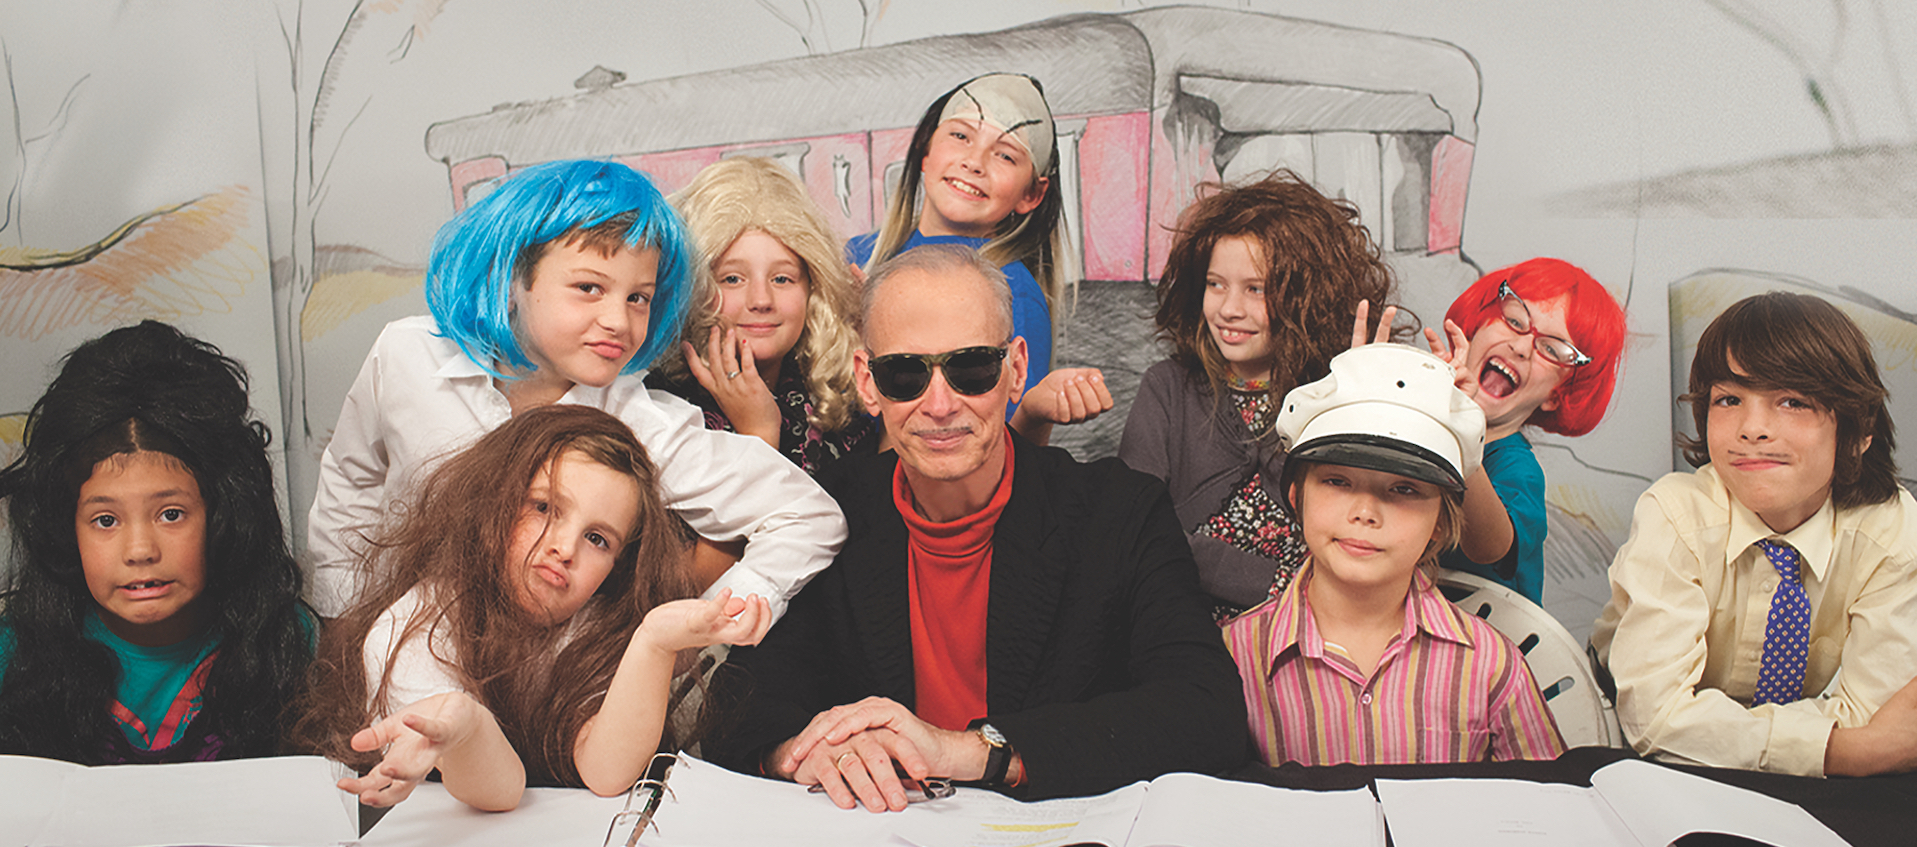 Artist and filmmaker John Waters sits surrounded by the all-children cast of Kiddie Flamingos, the G-rated retelling of Pink Flamingos